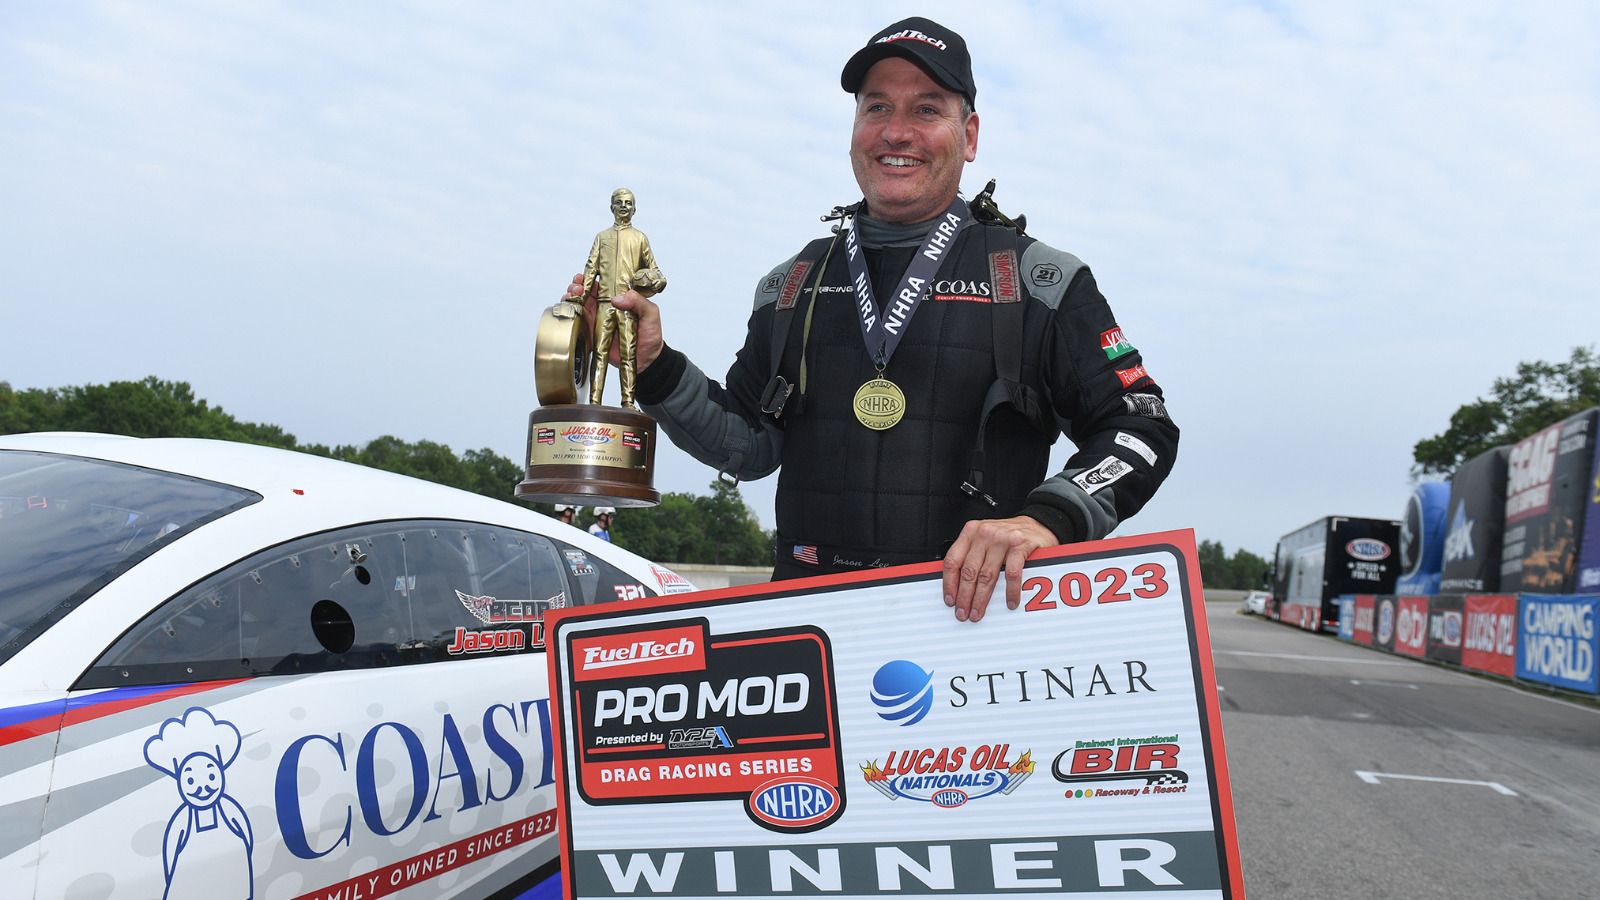 Jason Lee Earns First Career Victory in FuelTech NHRA Pro Mod Drag Racing Series